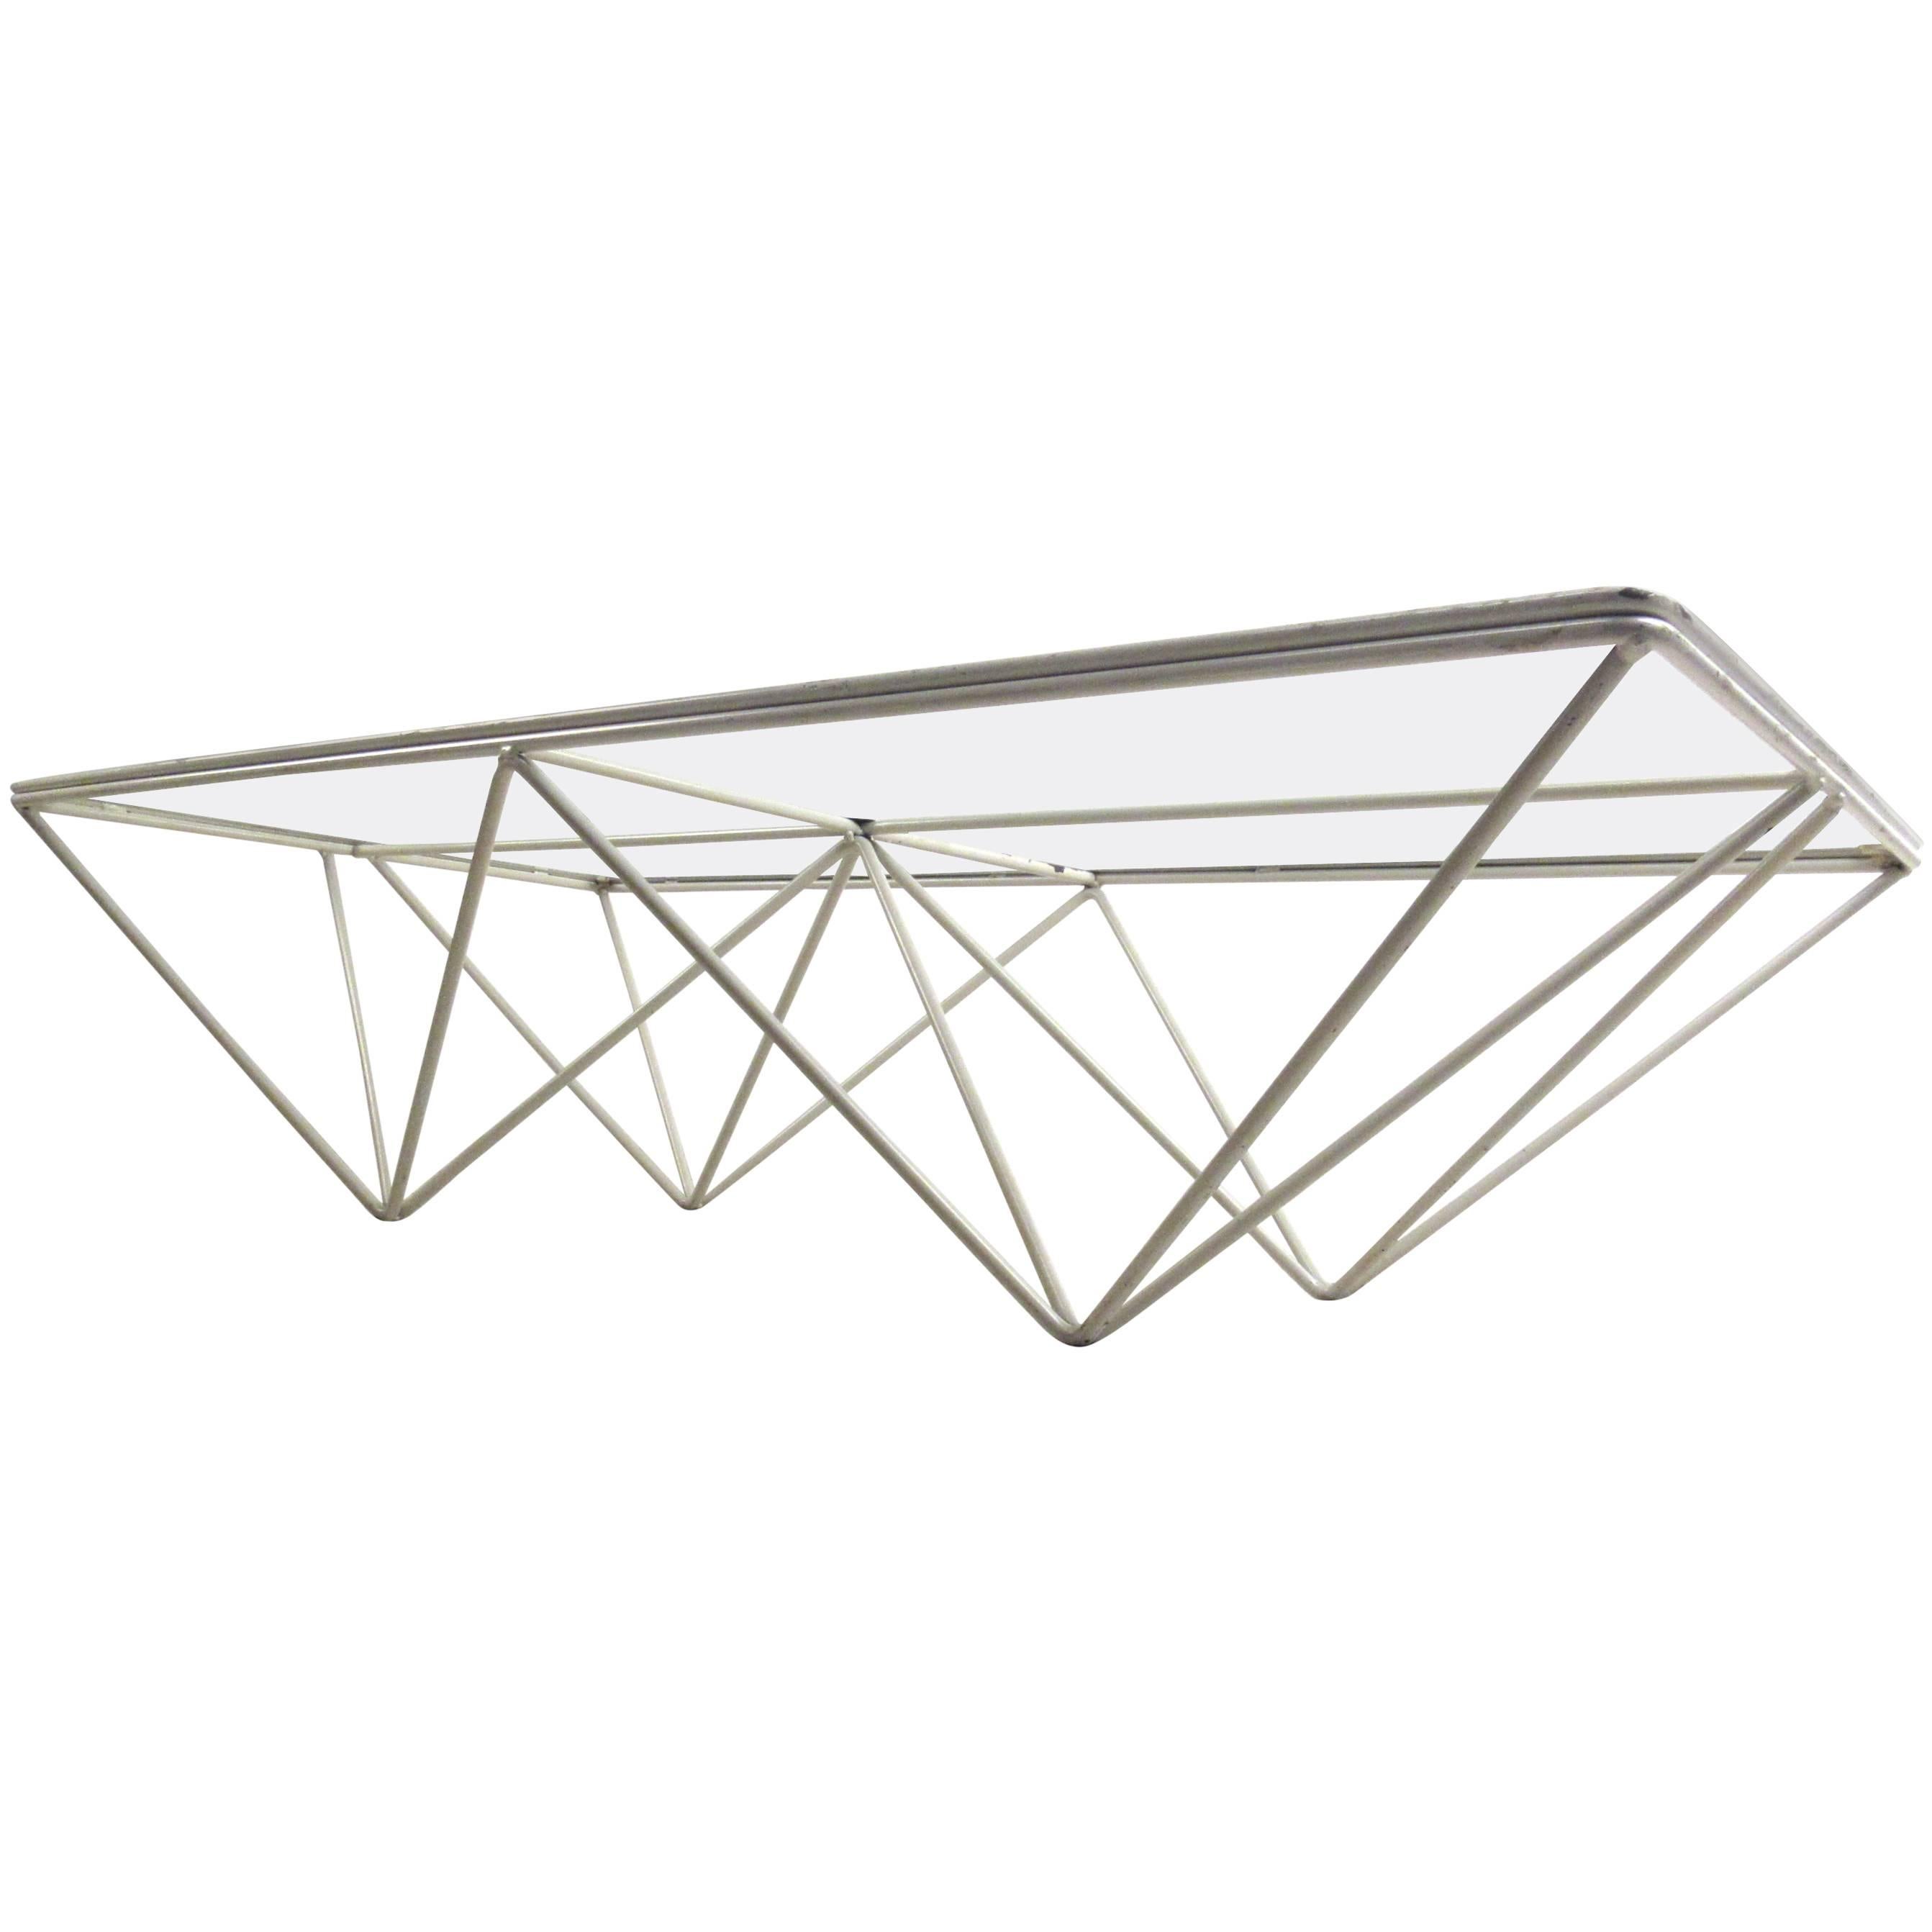 Pyramid Coffee Table, style of Paolo Piva